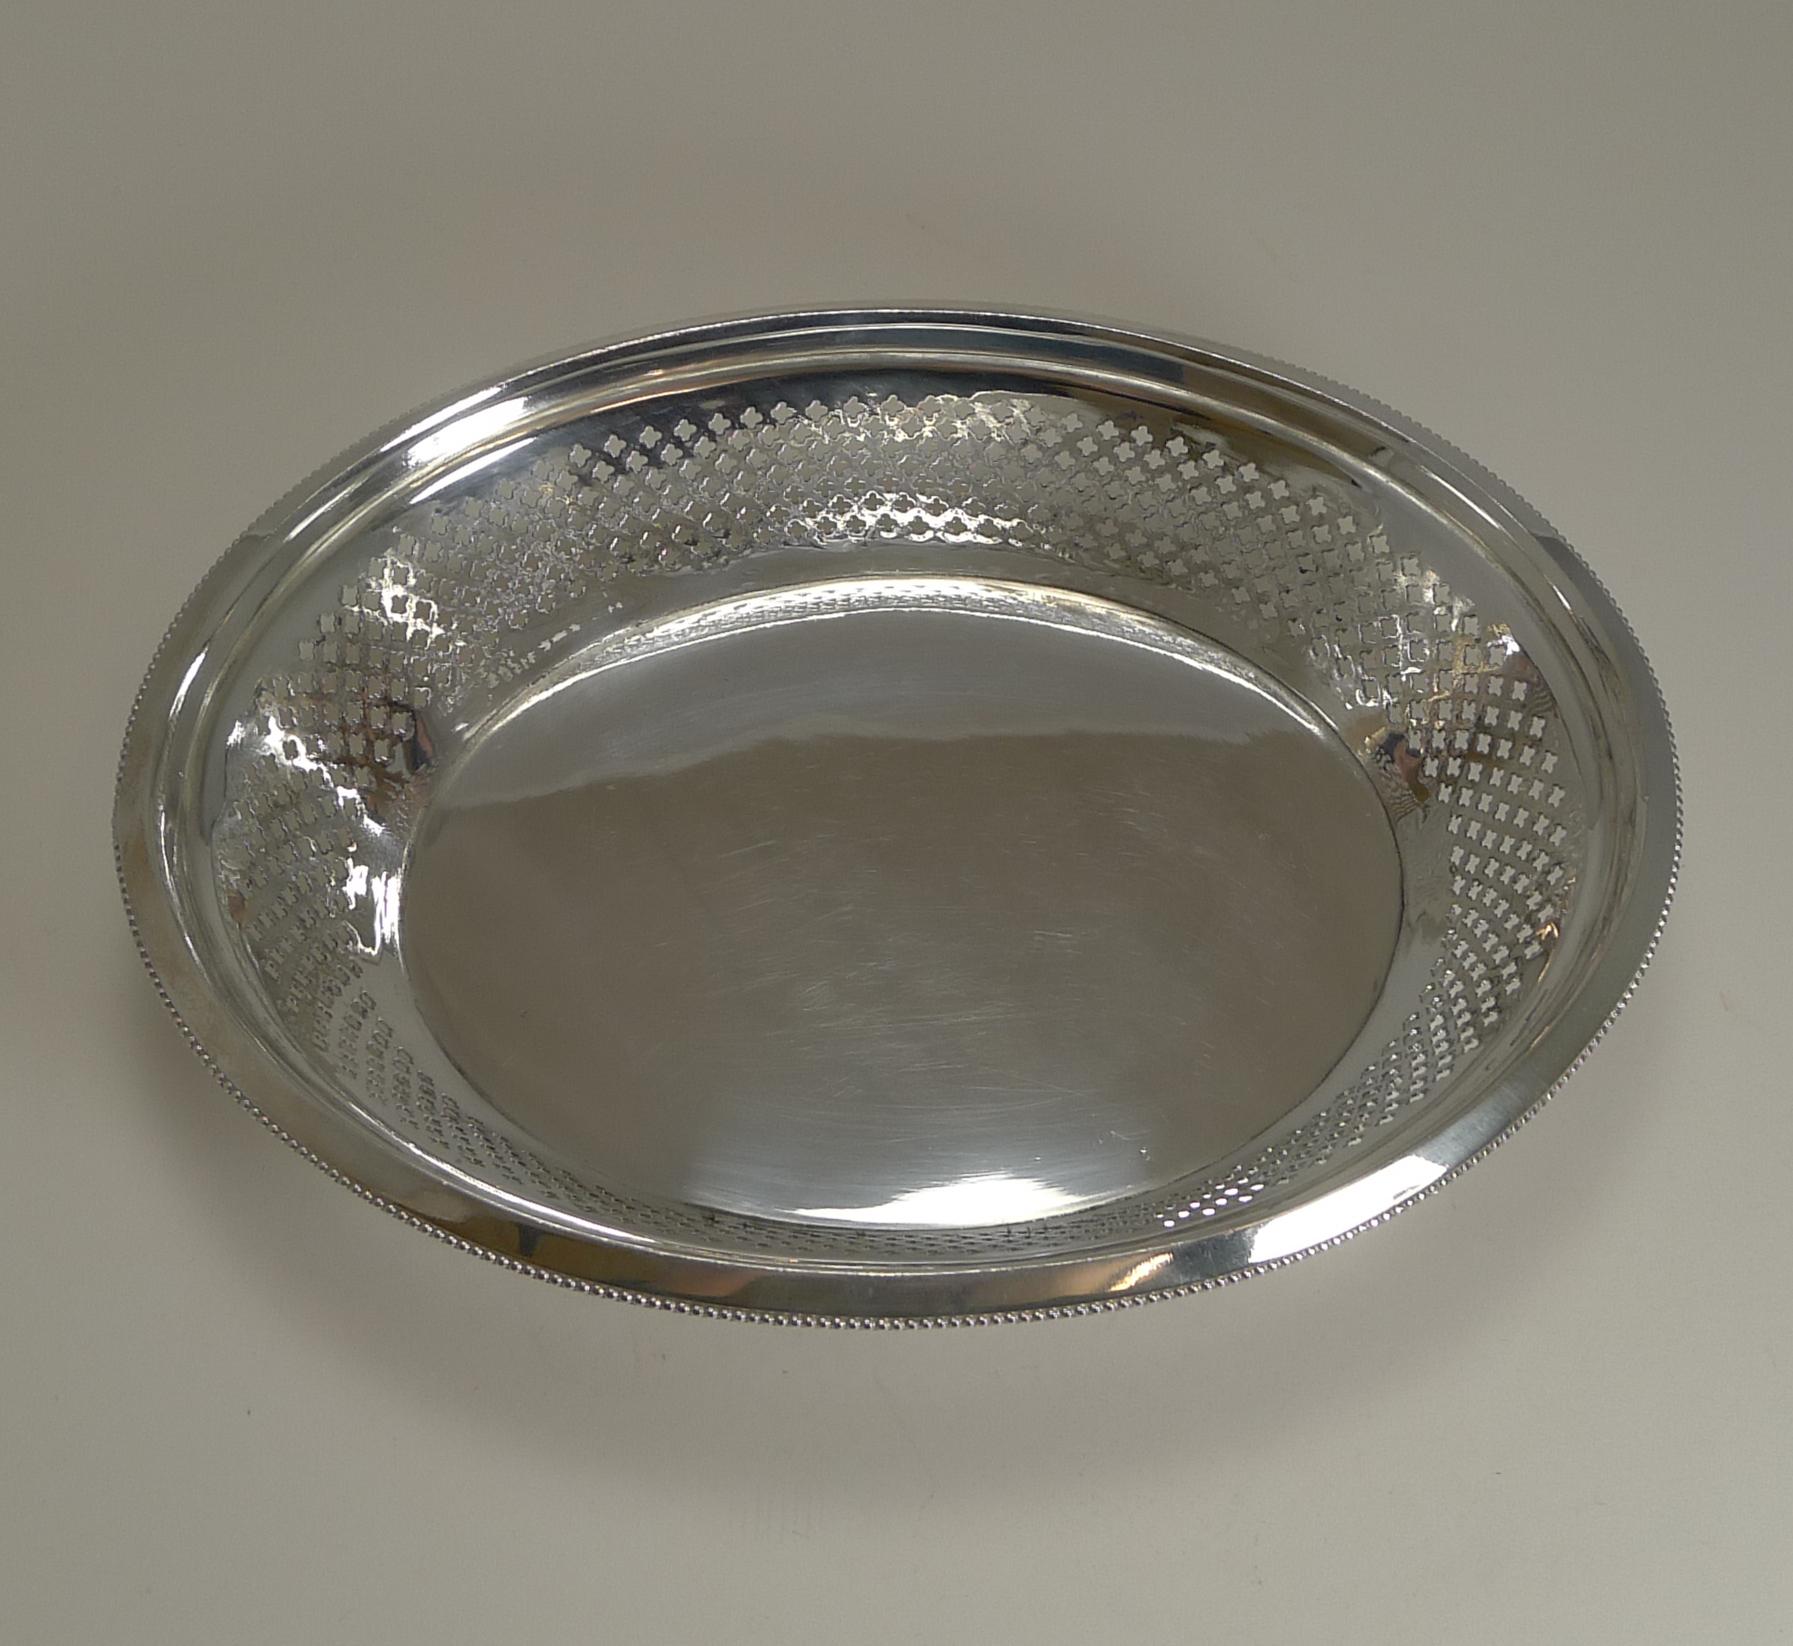 Antique English Silver Plated Bread Basket by Atkin Brothers, Reg. 1873 2